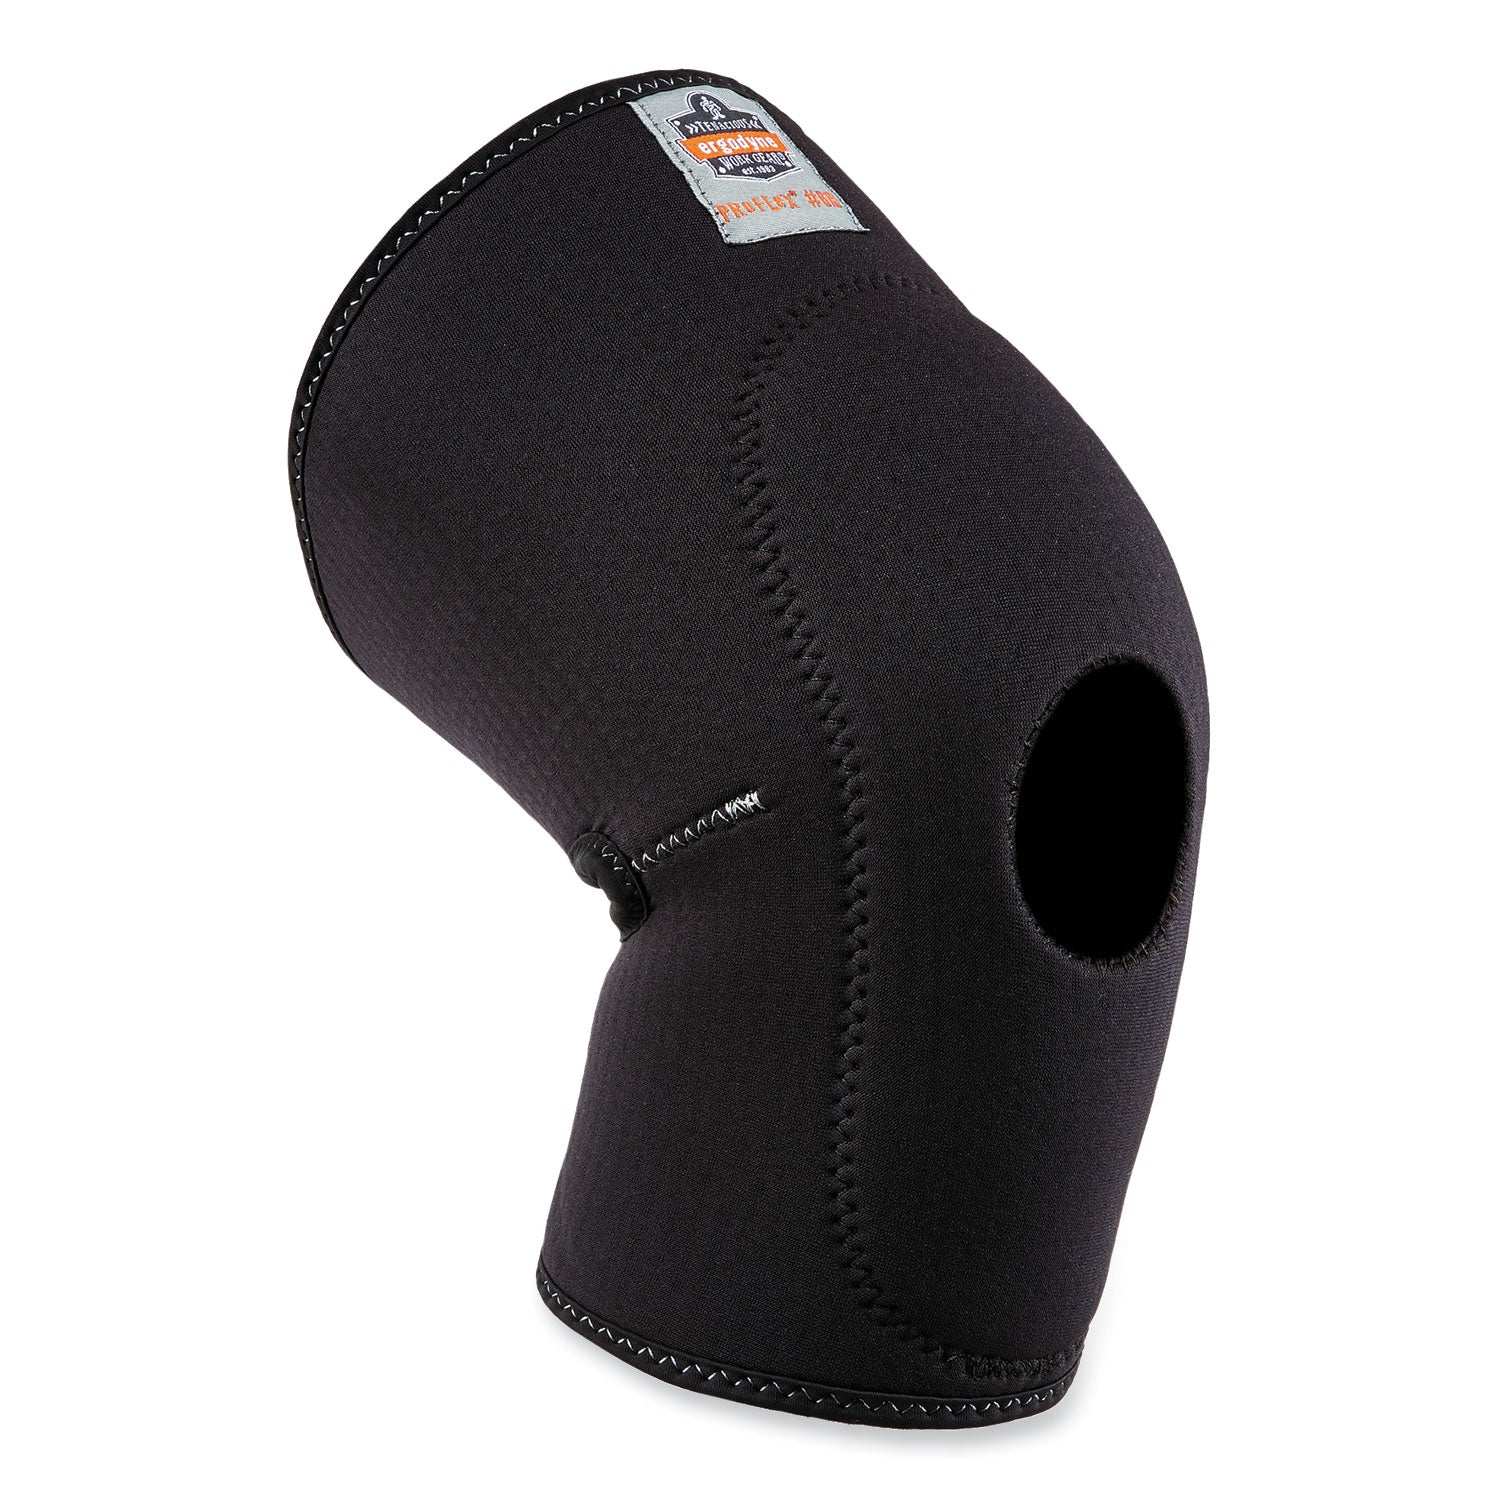 proflex-615-open-patella-anterior-pad-knee-sleeve-small-black-ships-in-1-3-business-days_ego16532 - 1